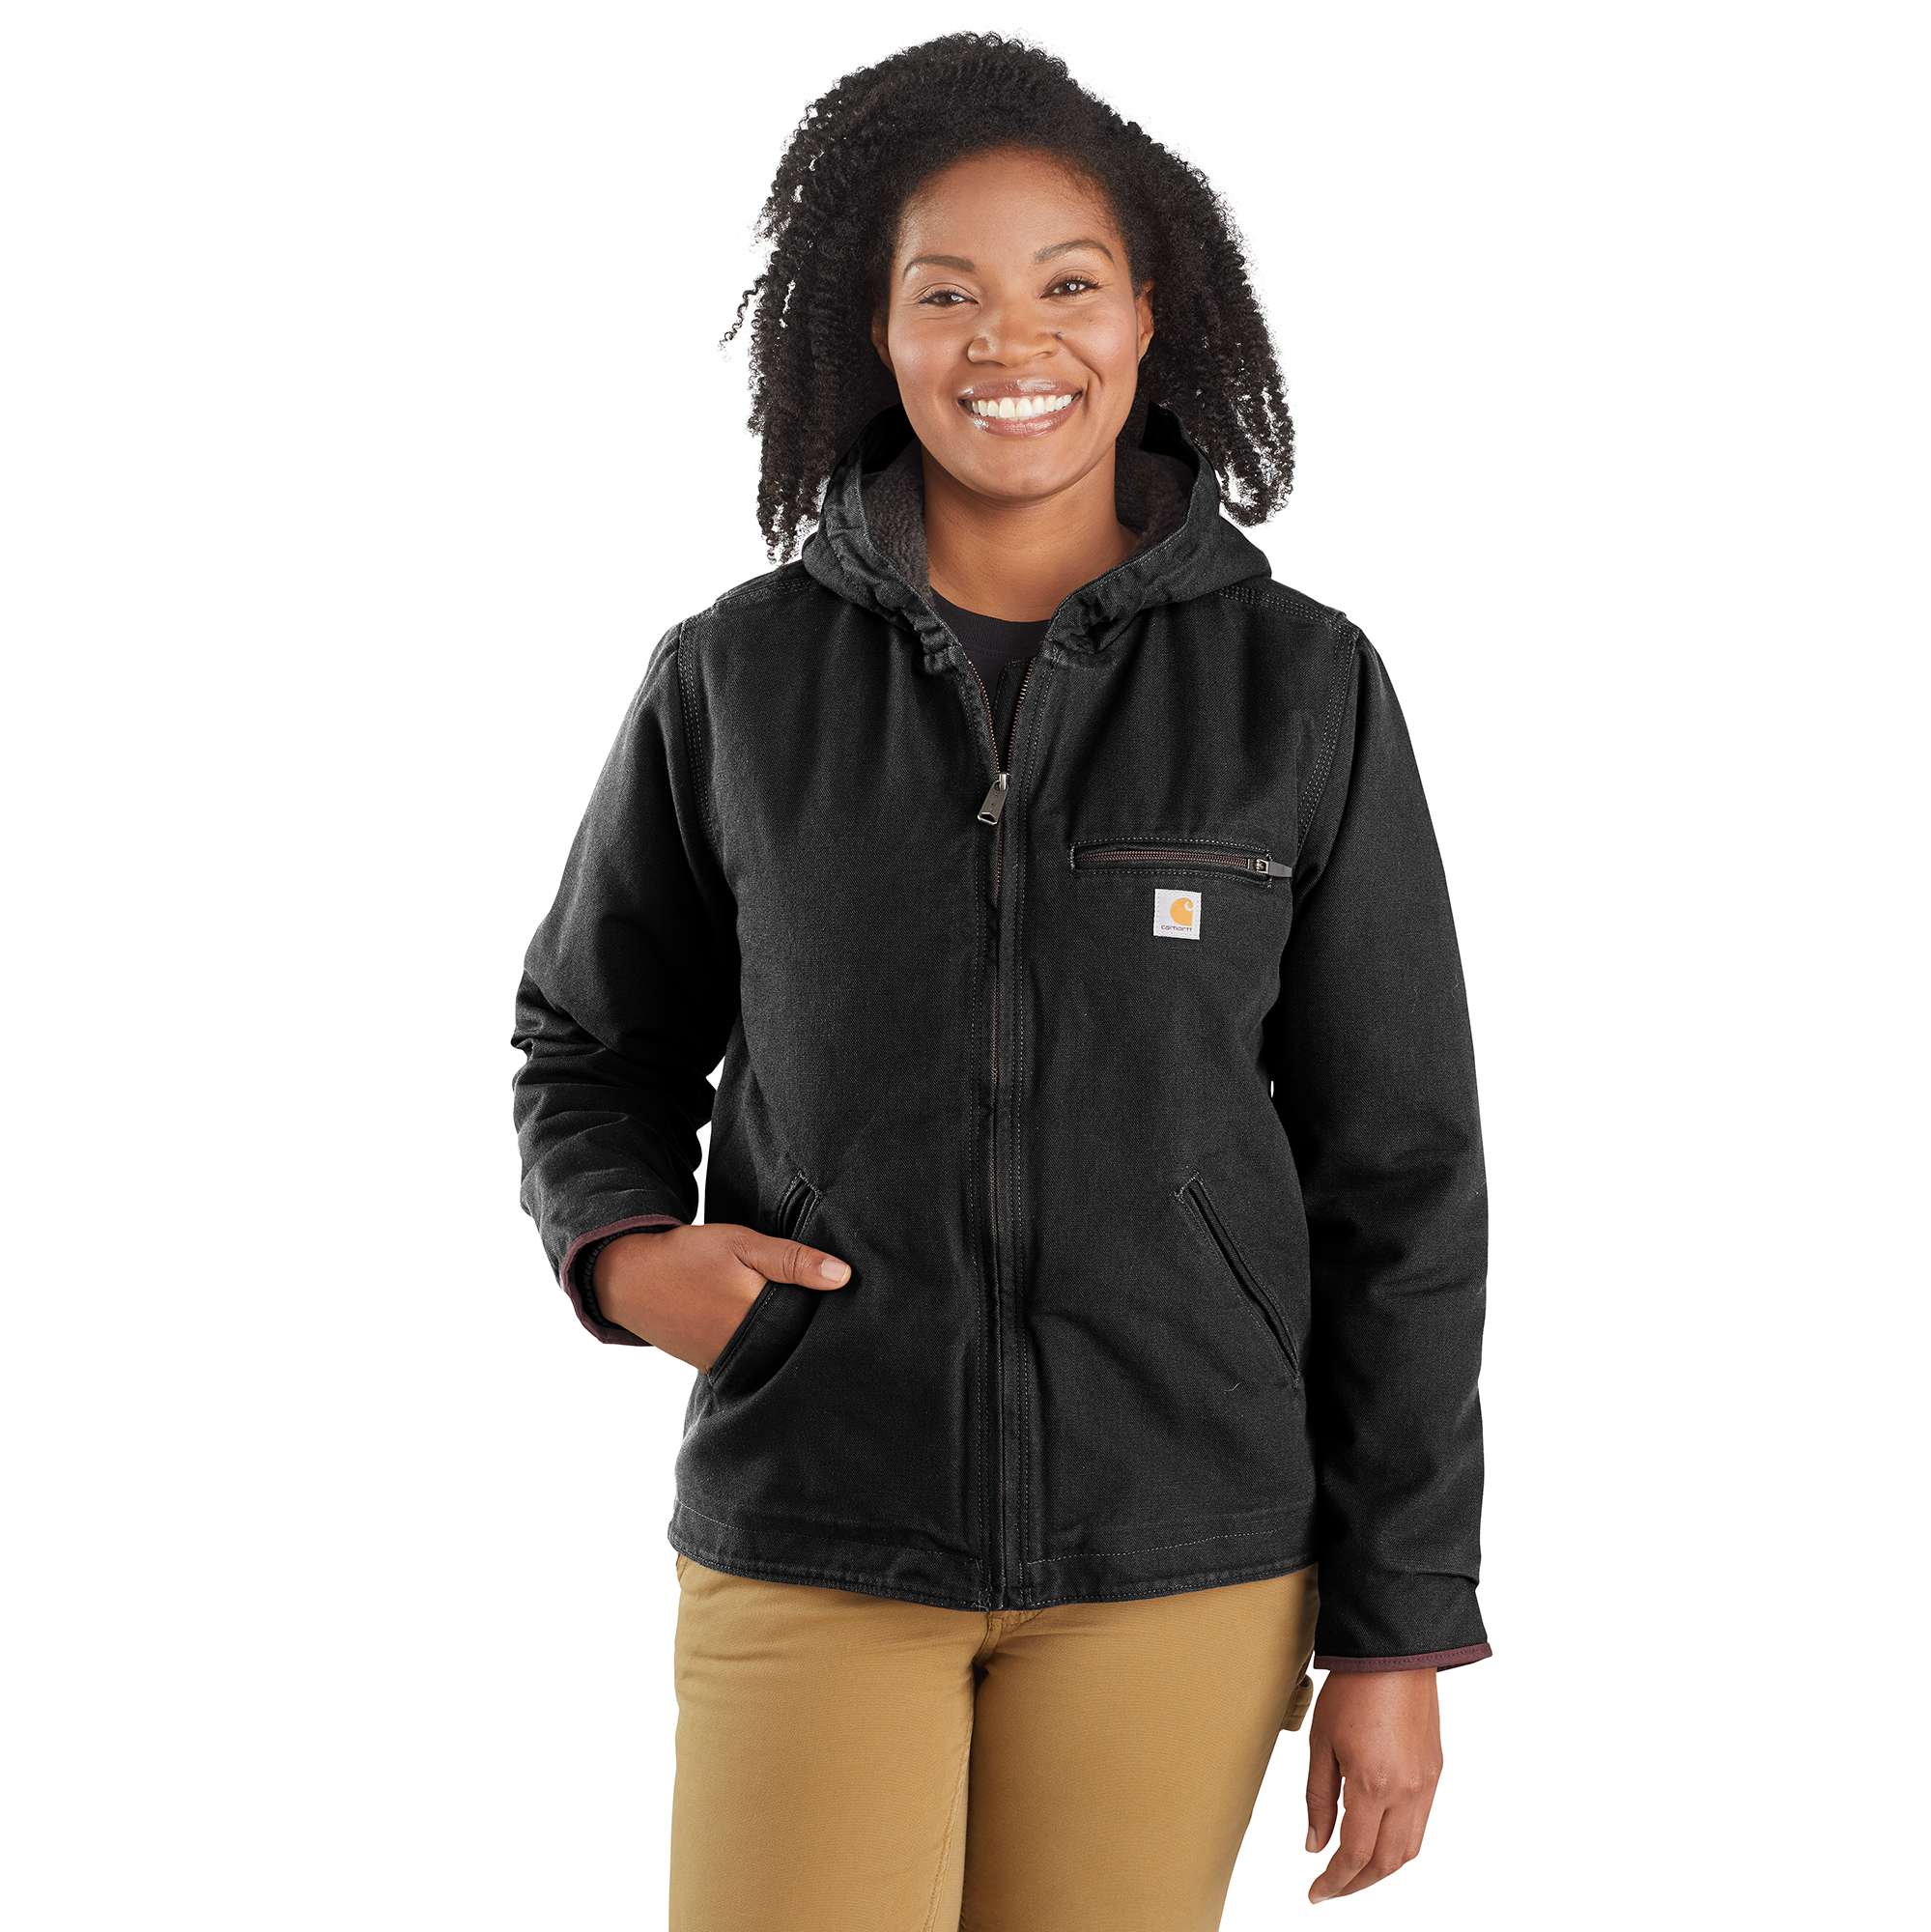 Warm Up with These Carhartt Winter Essentials! – Hub-365